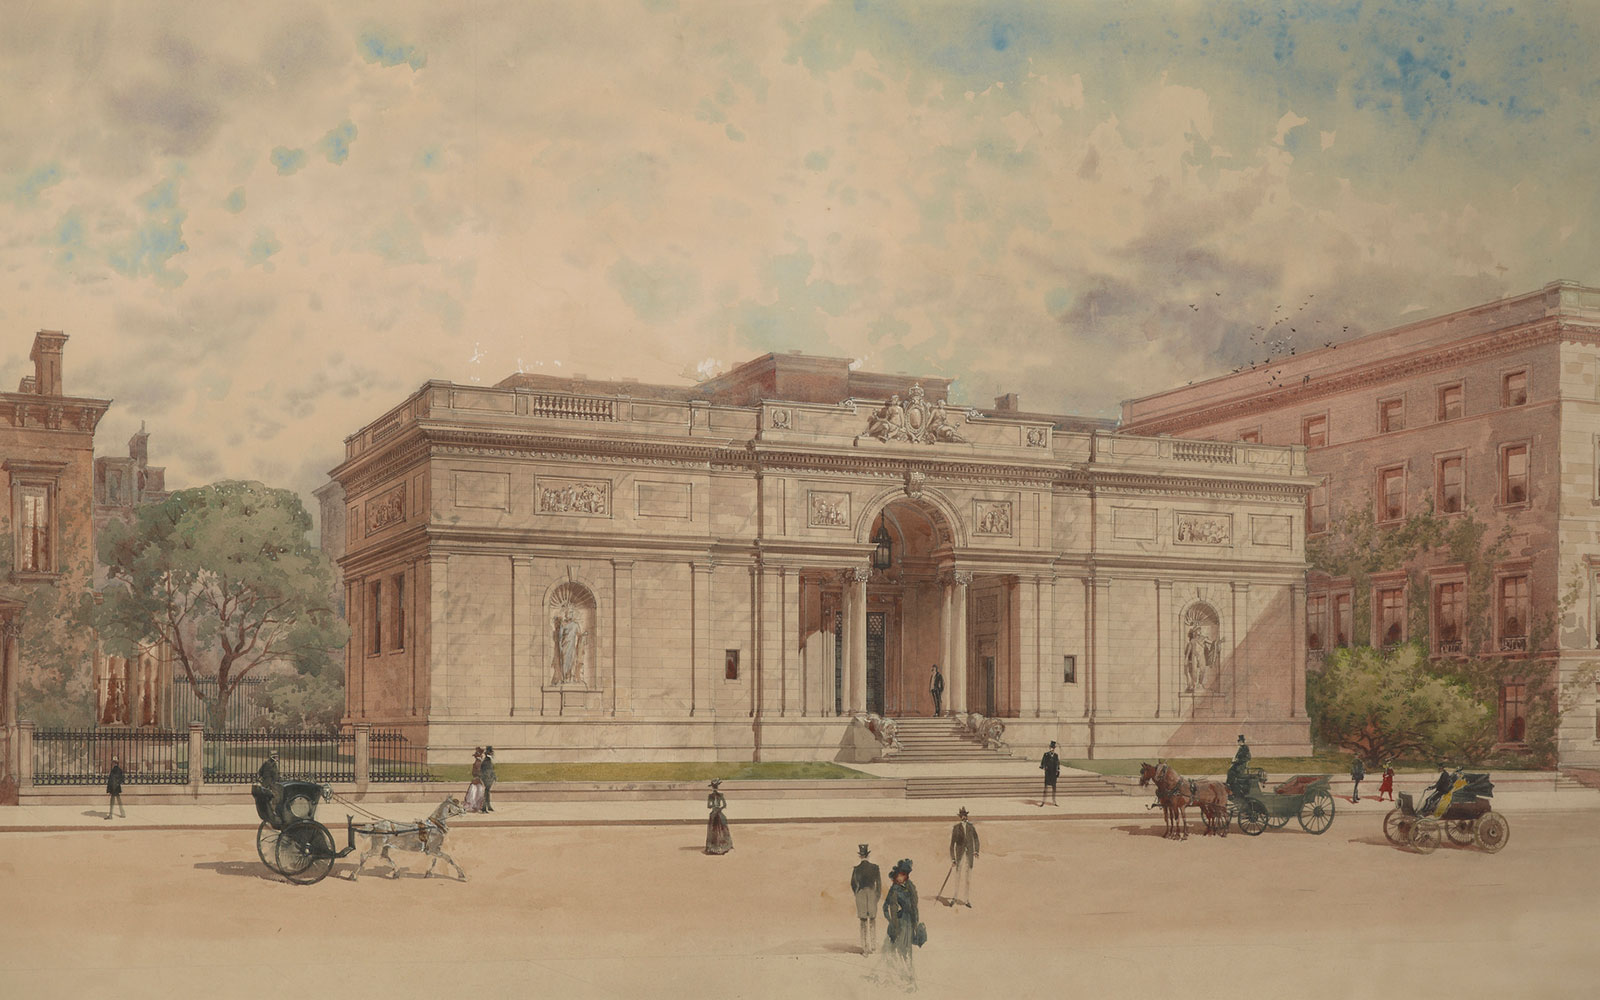 Architecural drawing of J. Pierpont Morgan's Library with open street and figures in foreground and green foliage in background.